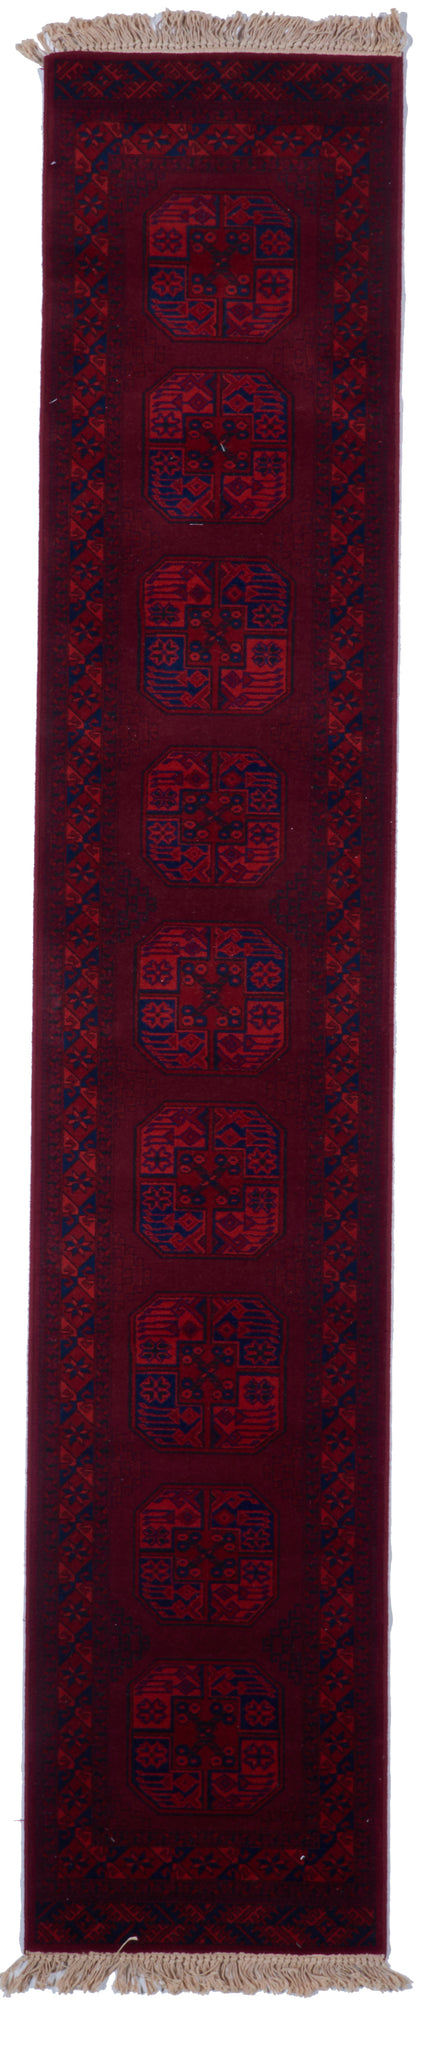 Bokhara Traditional Hand Knotted Red Runner Wool Rug 2'3 x 12' - IGotYourRug